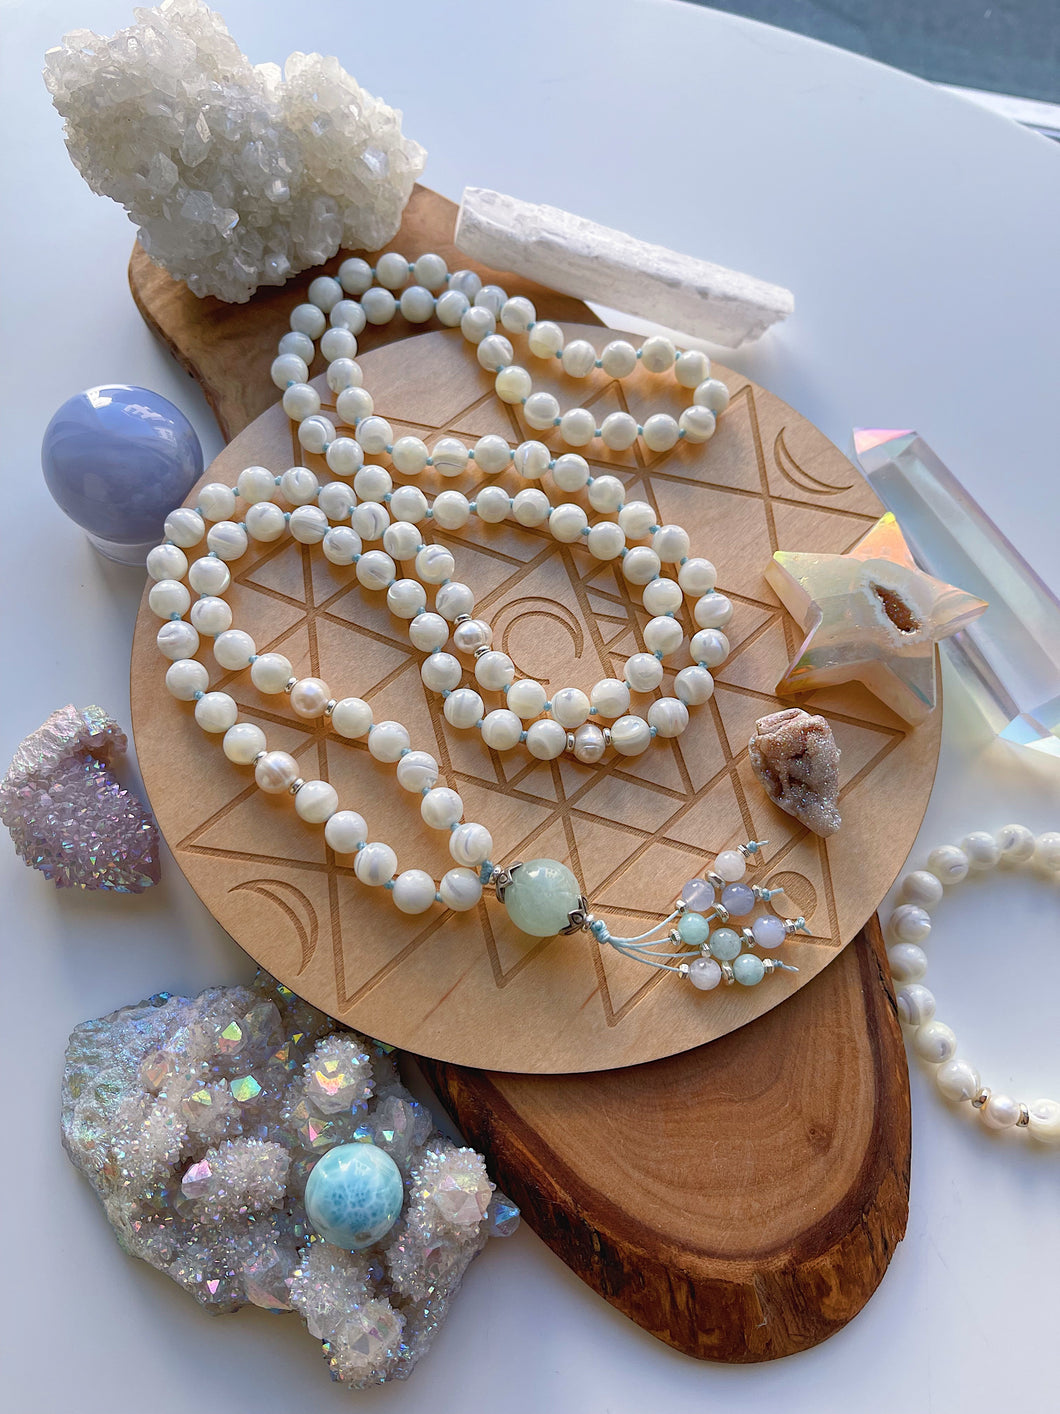 RESERVED - Express shipping - Mother of Pearl, Blue Chalcedony, Aquamarine, Freshwater Pearl, Moonstone, Karen Hill Tribe Silver - 108 Mala Necklace + Bracelet